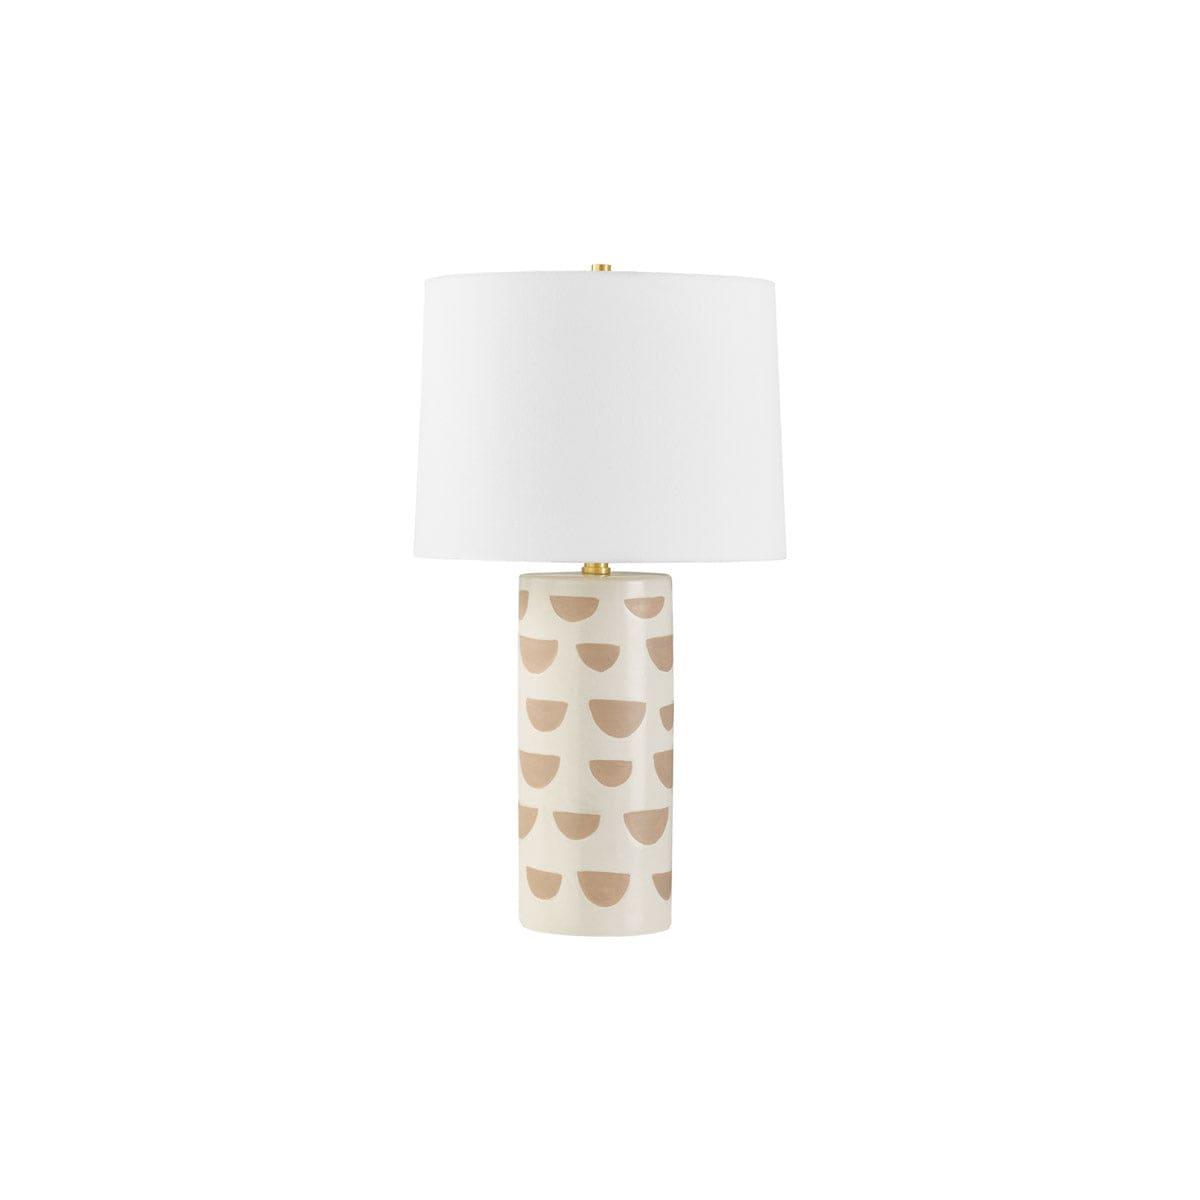 Mitzi - Minnie Table Lamp - HL714201A-AGB/CWO | Montreal Lighting & Hardware